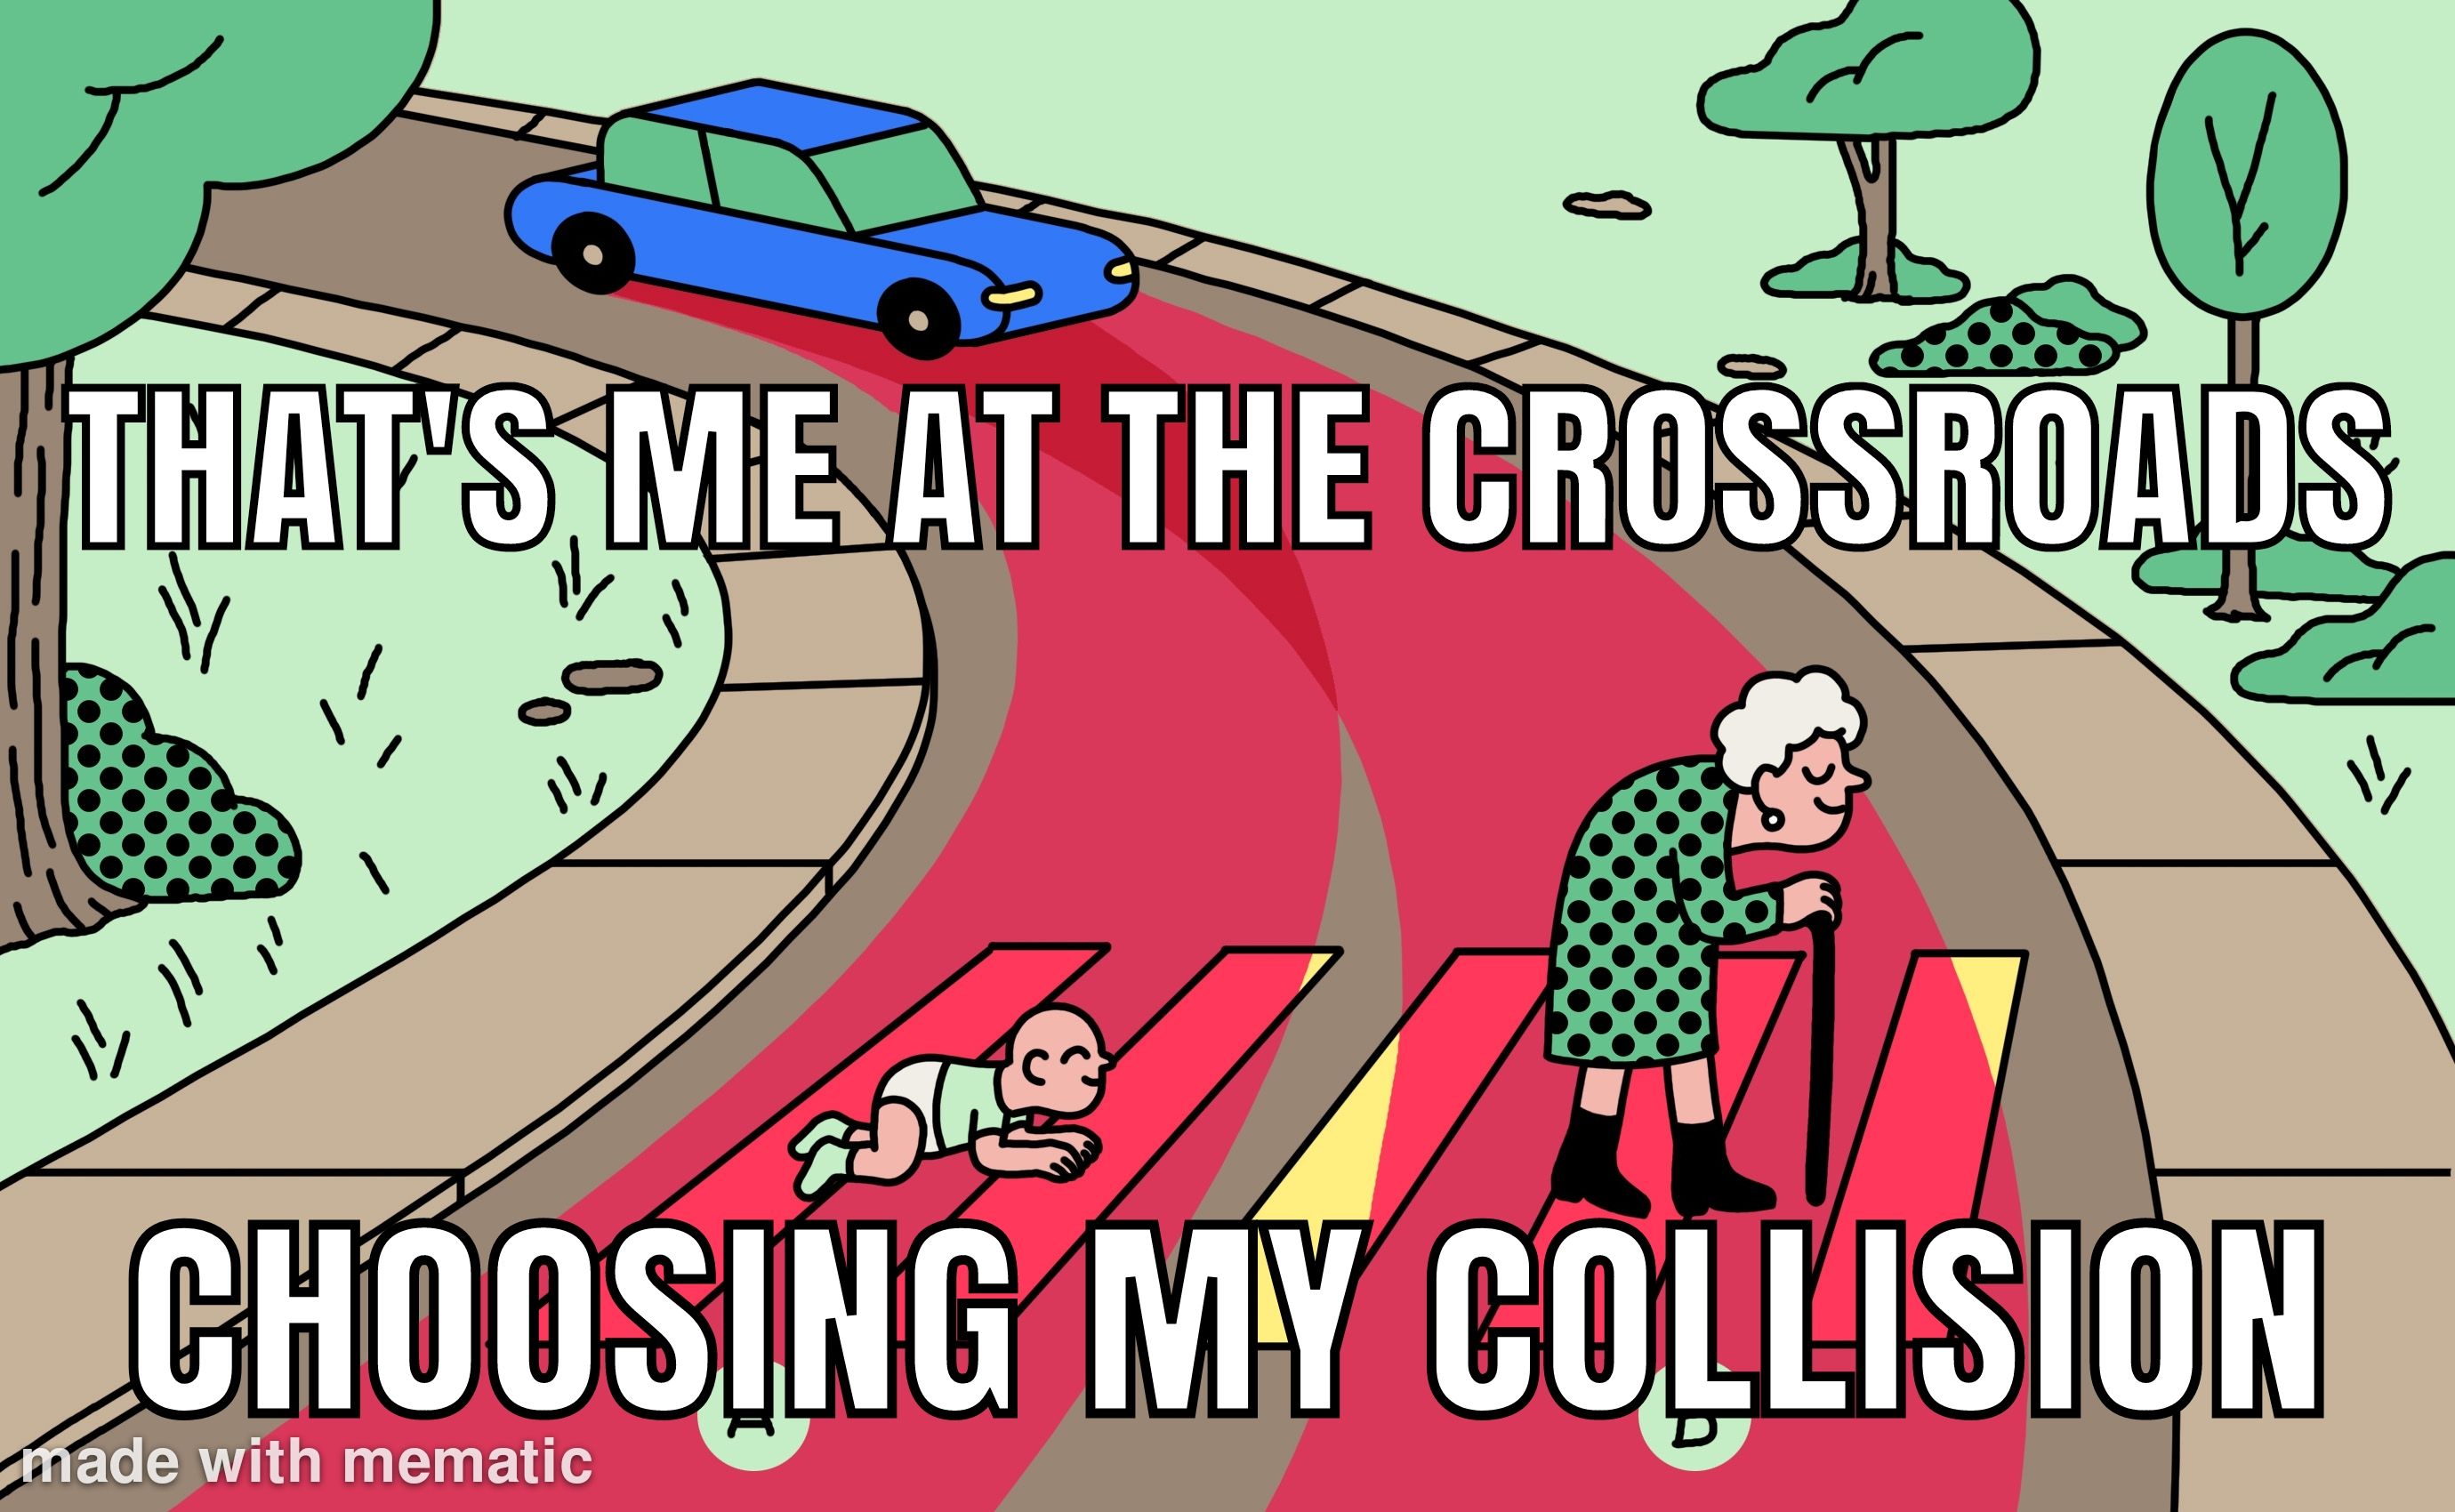 That's me at the crossroads